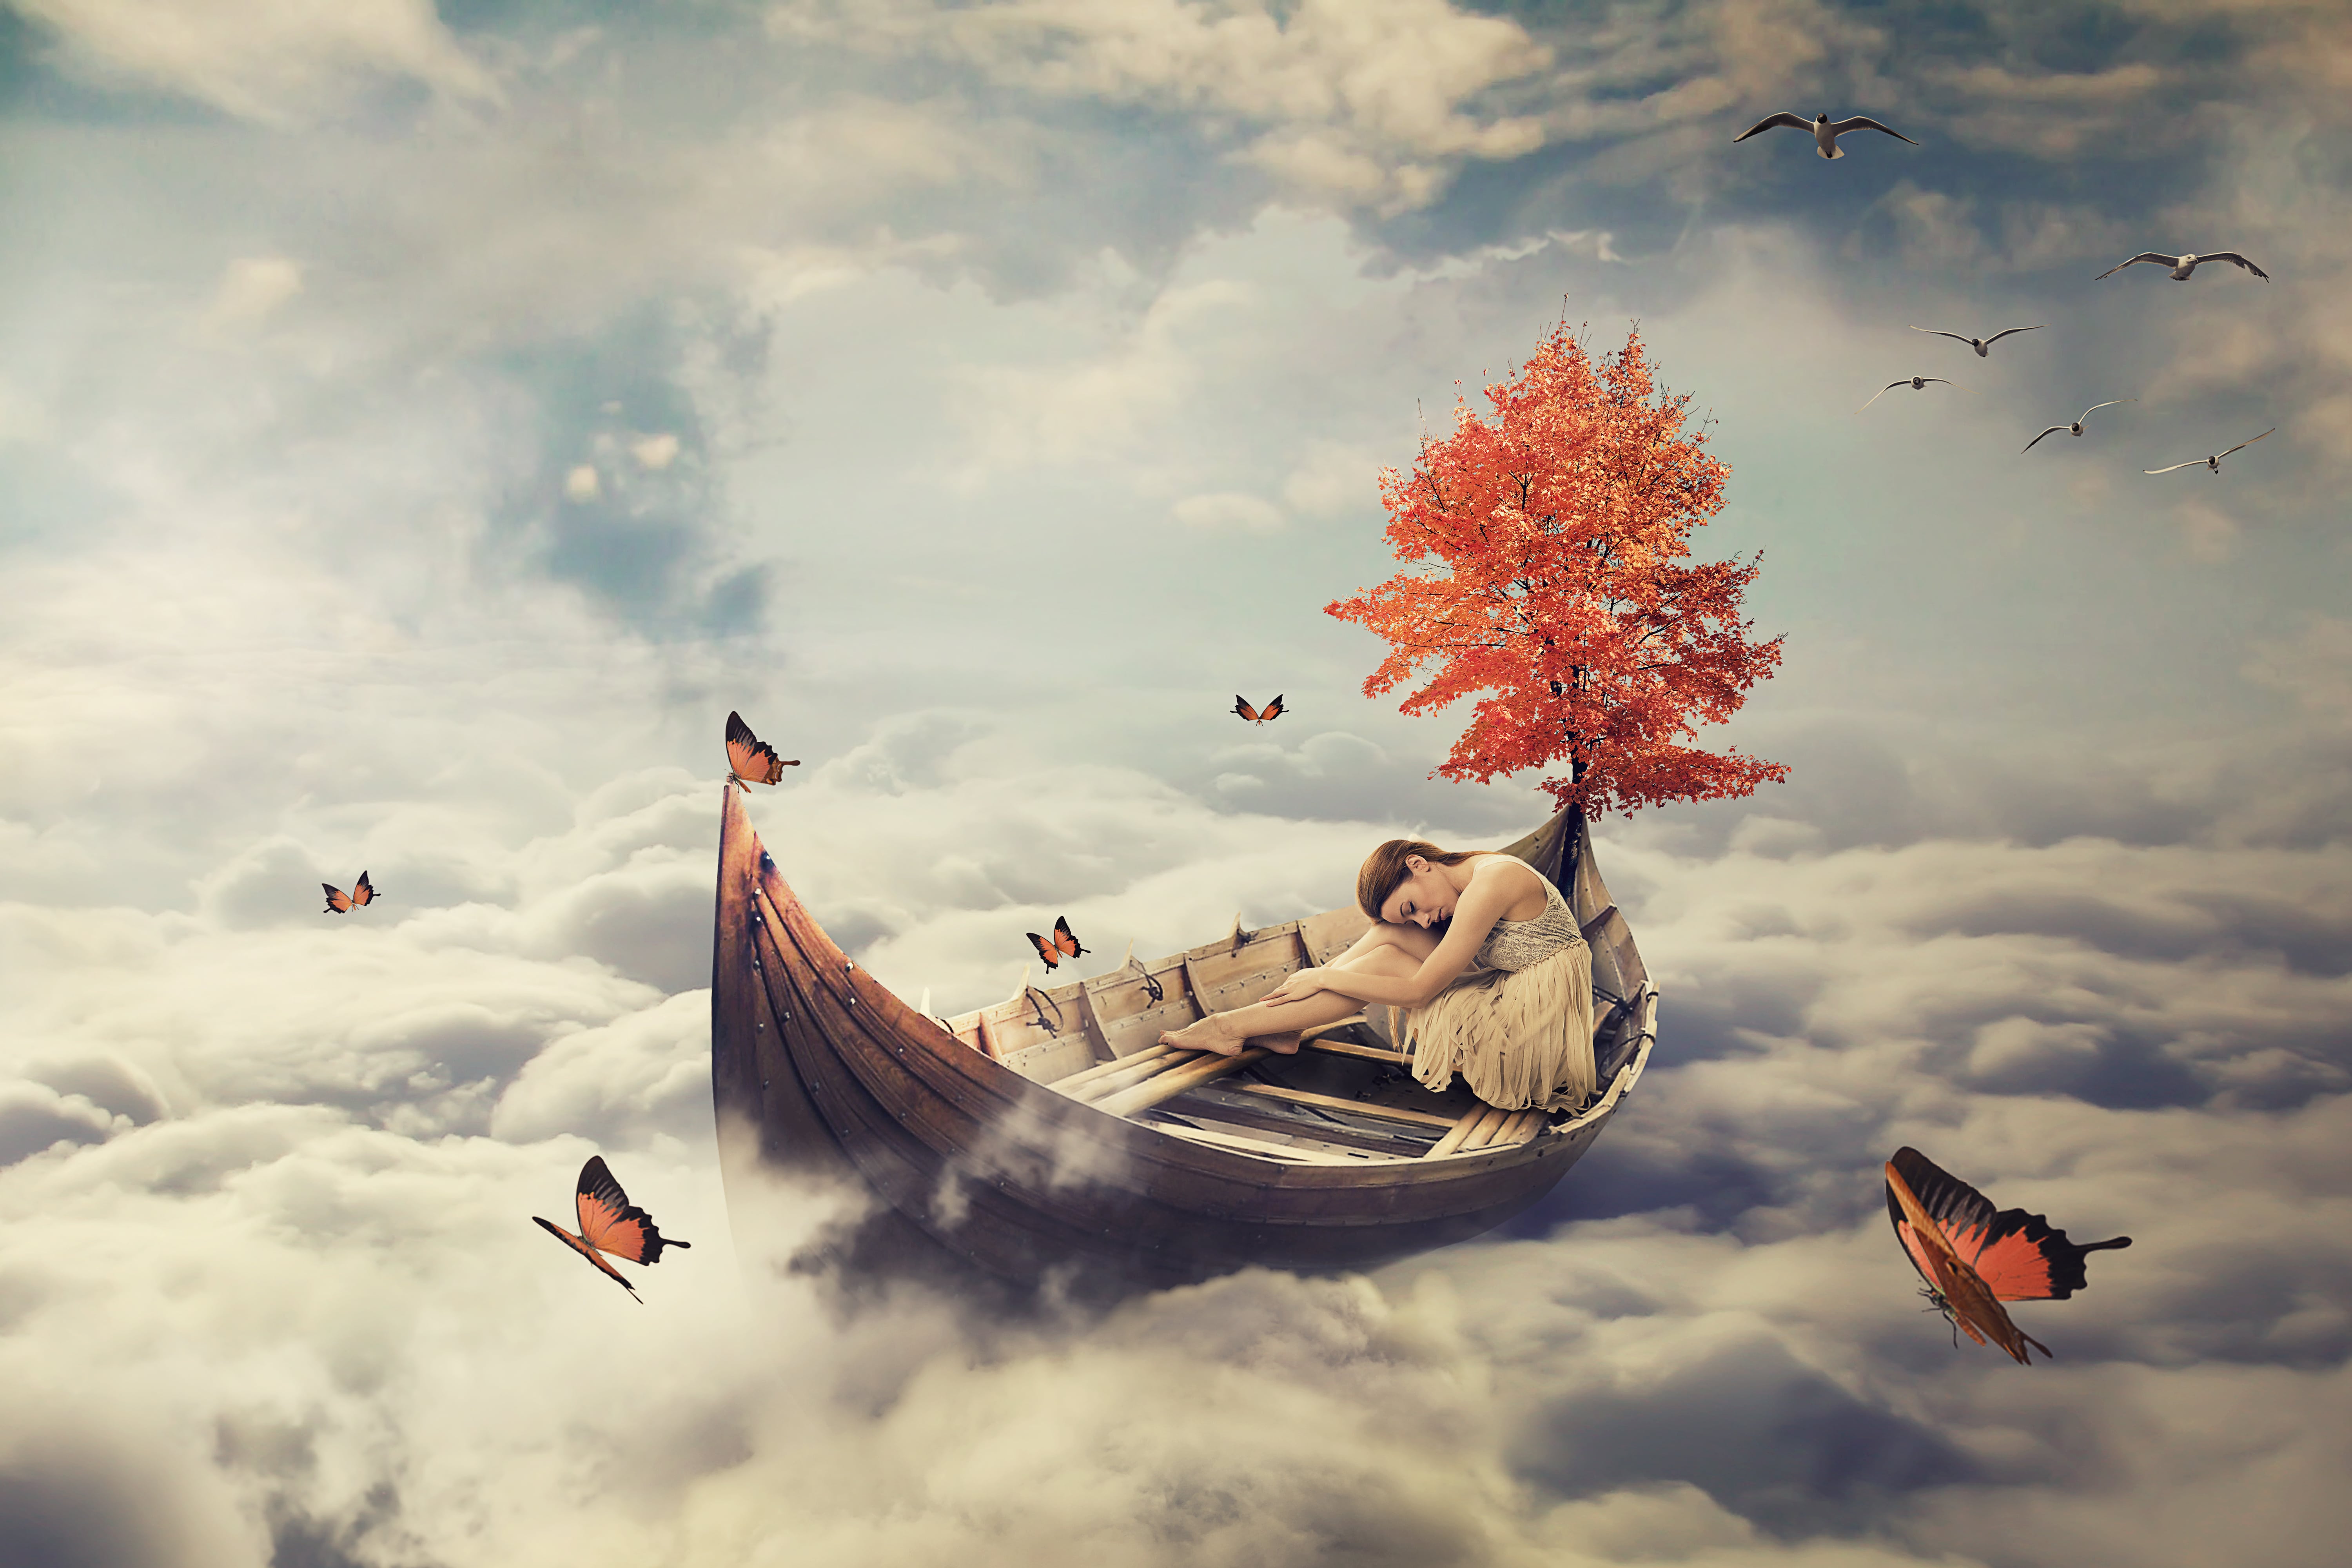 Image of a woman dreaming of being on a boat, floating through the clouds surrounded by butterflies